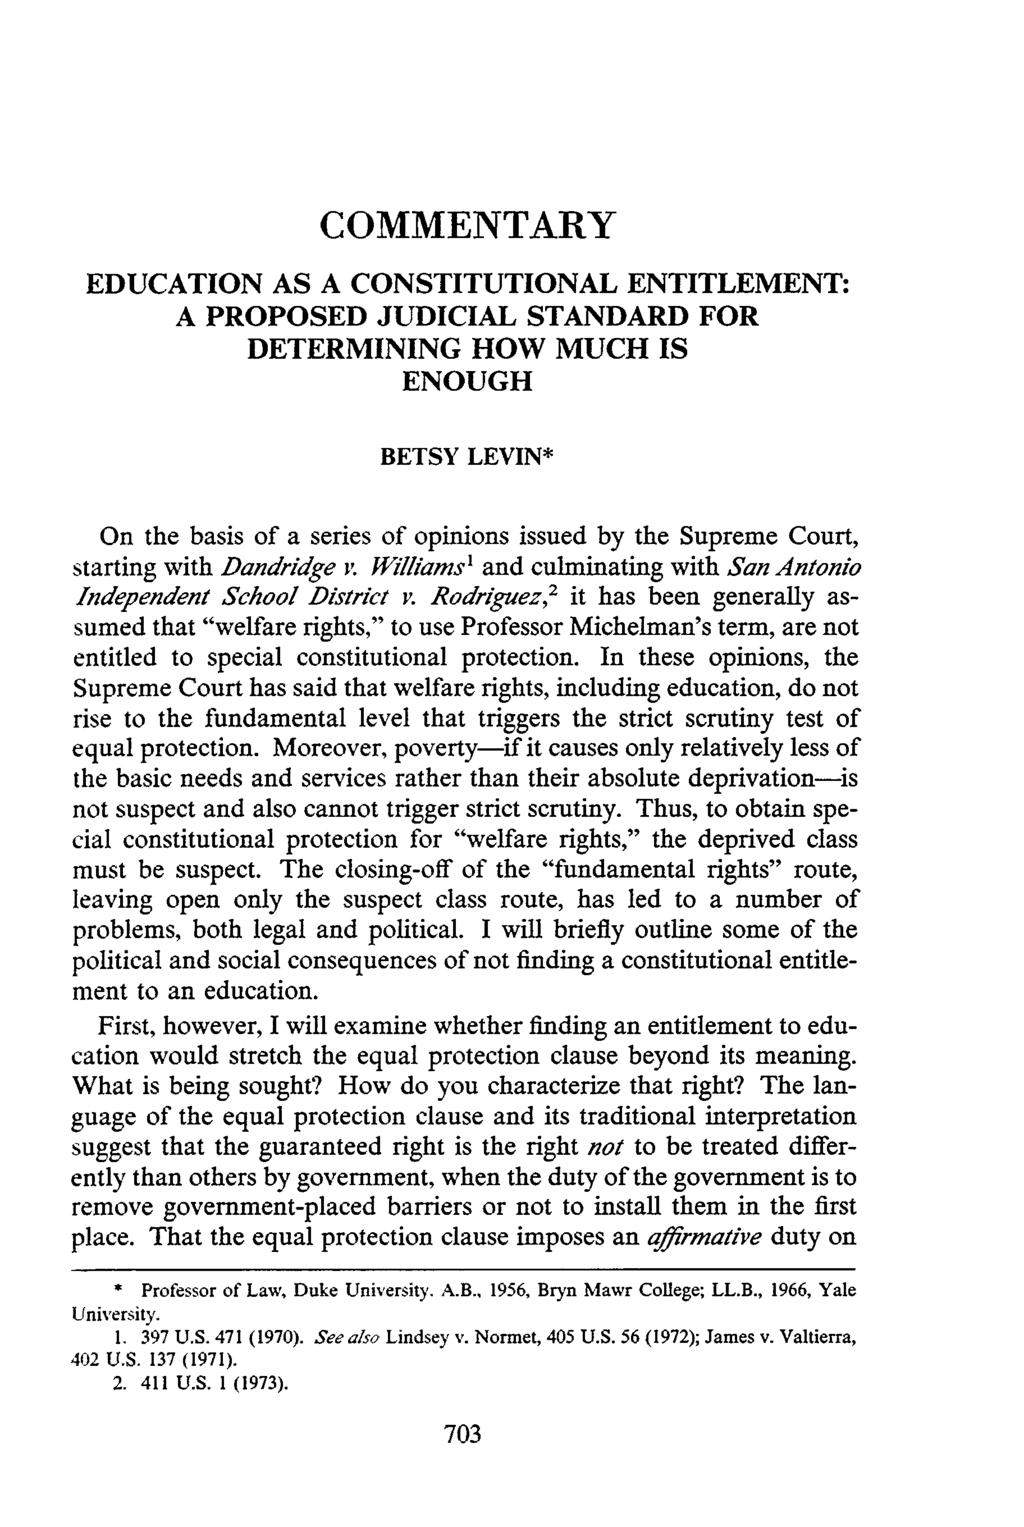 COMMENTARY EDUCATION AS A CONSTITUTIONAL ENTITLEMENT: A PROPOSED JUDICIAL STANDARD FOR DETERMINING HOW MUCH IS ENOUGH BETSY LEVIN* On the basis of a series of opinions issued by the Supreme Court,